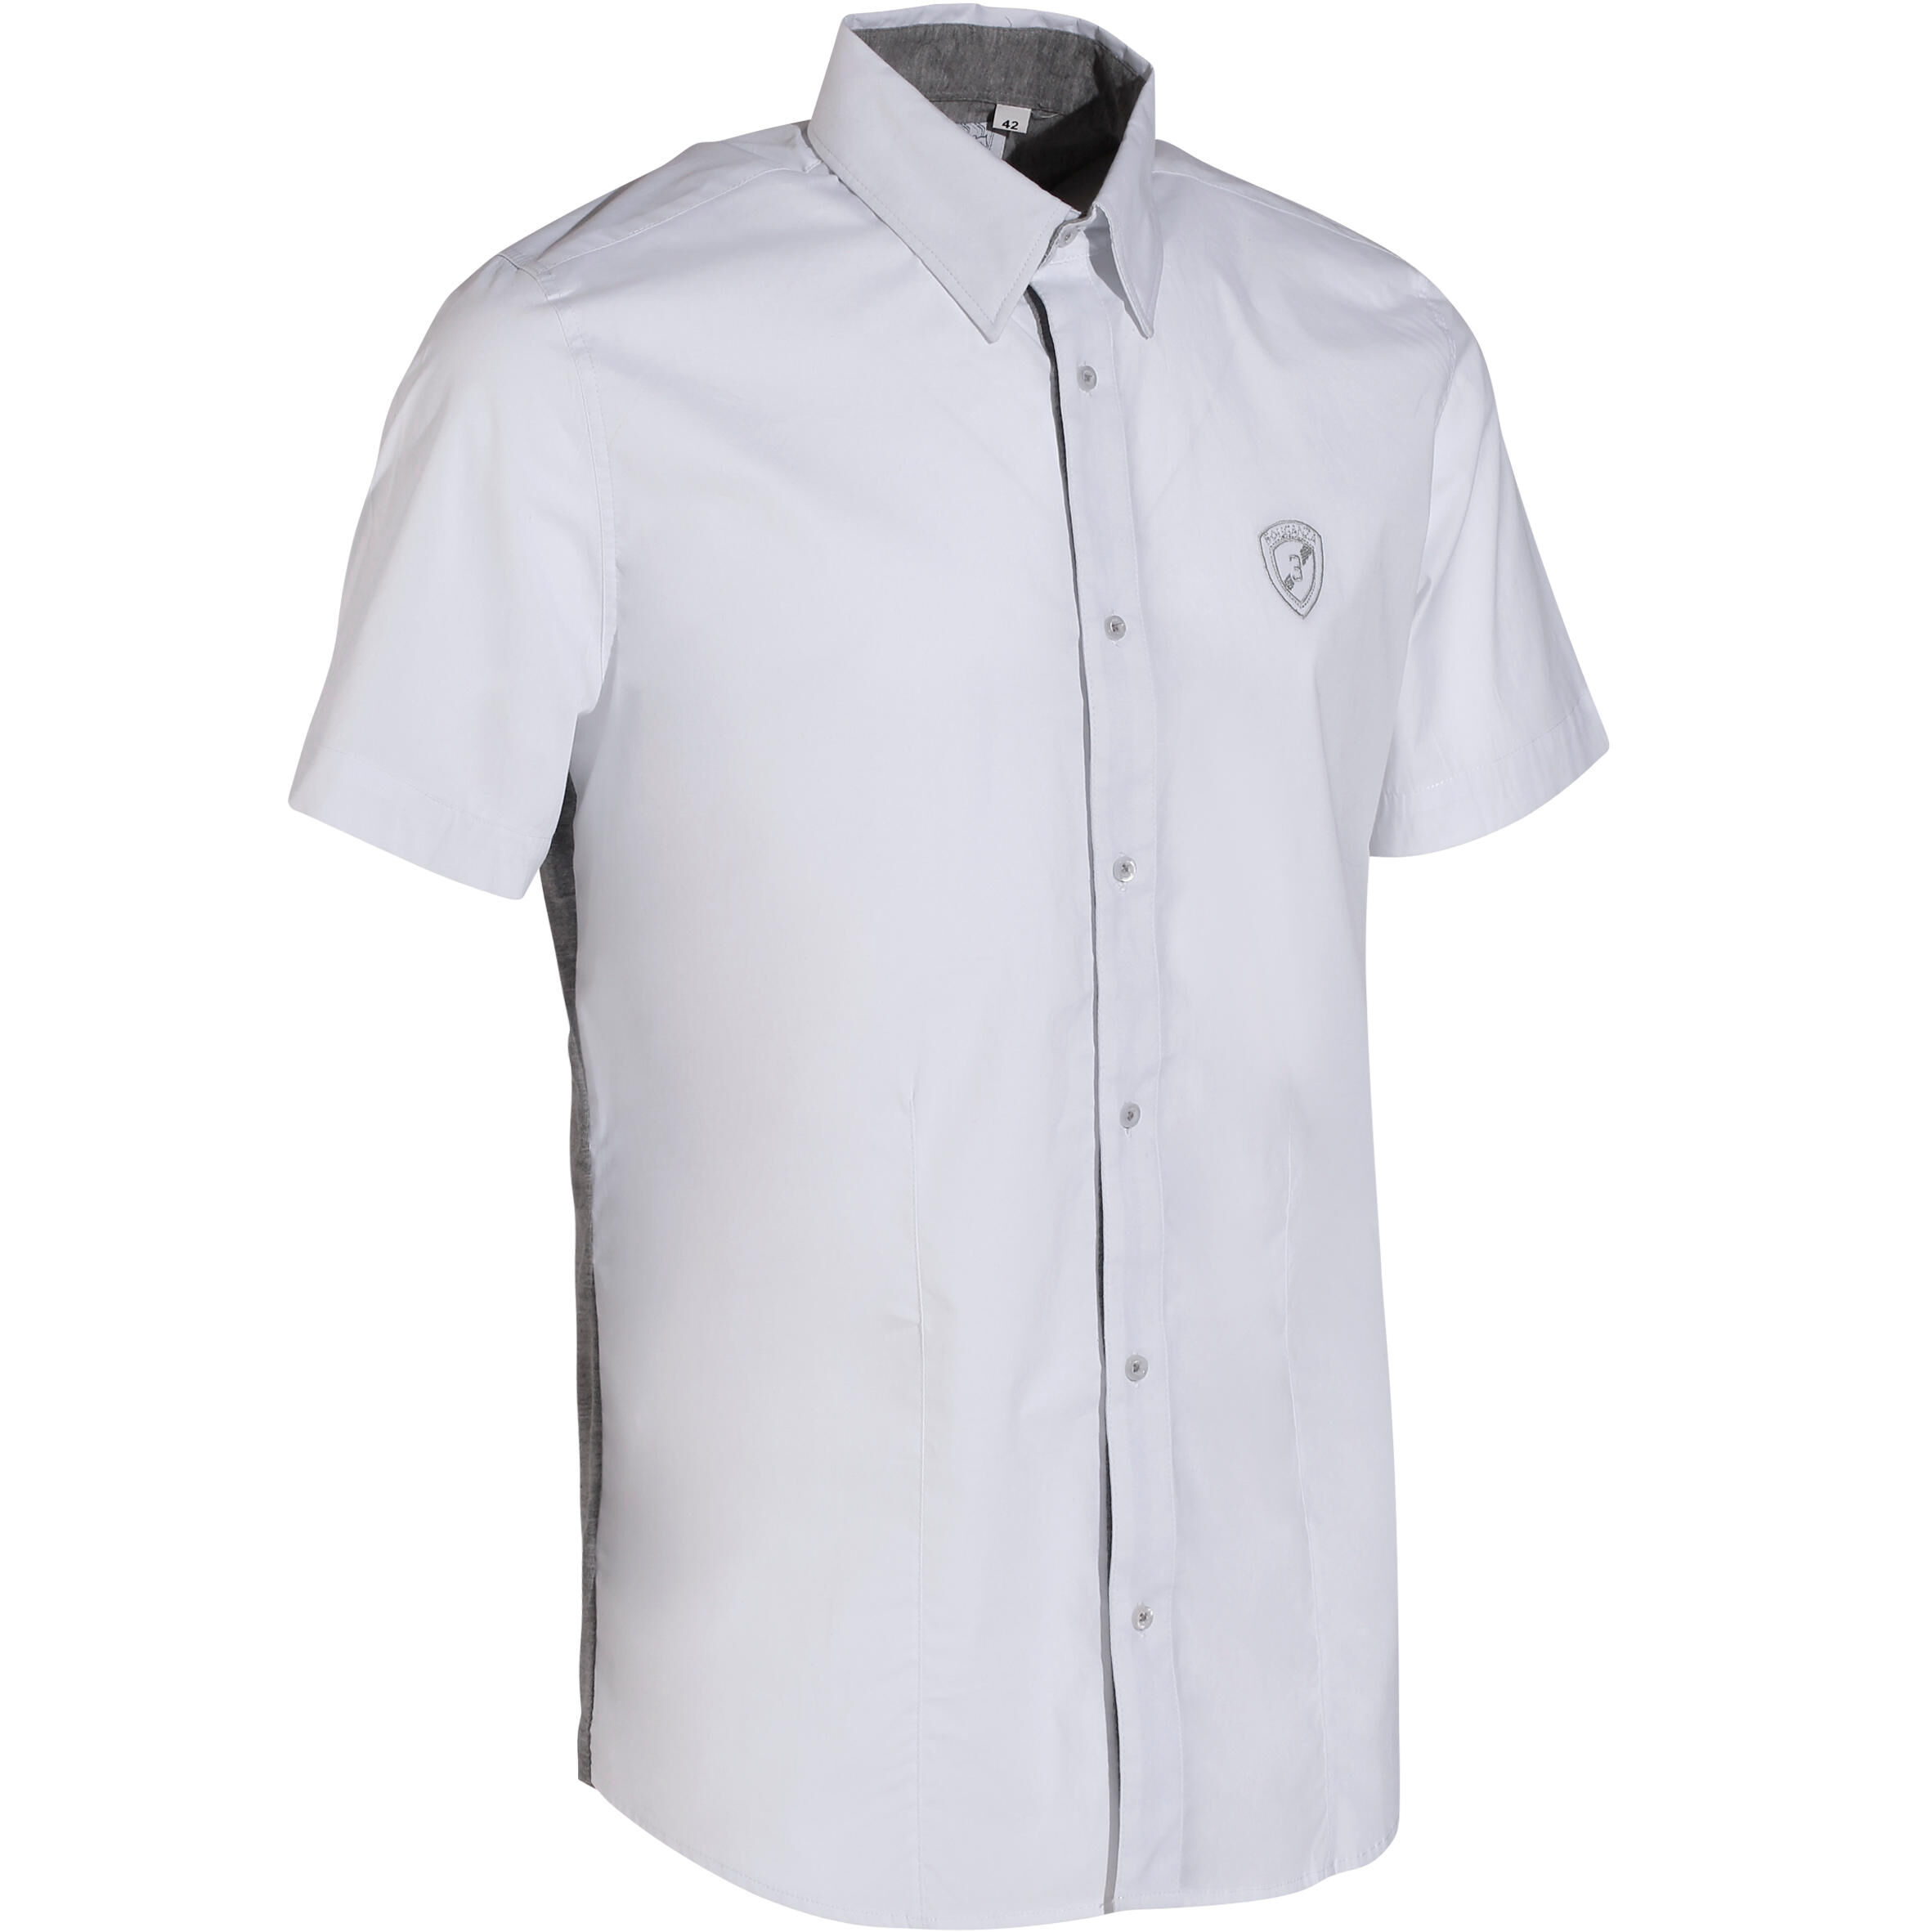 OKKSO Horse Riding Short-Sleeved Dual-Material Competition Shirt - White/Grey